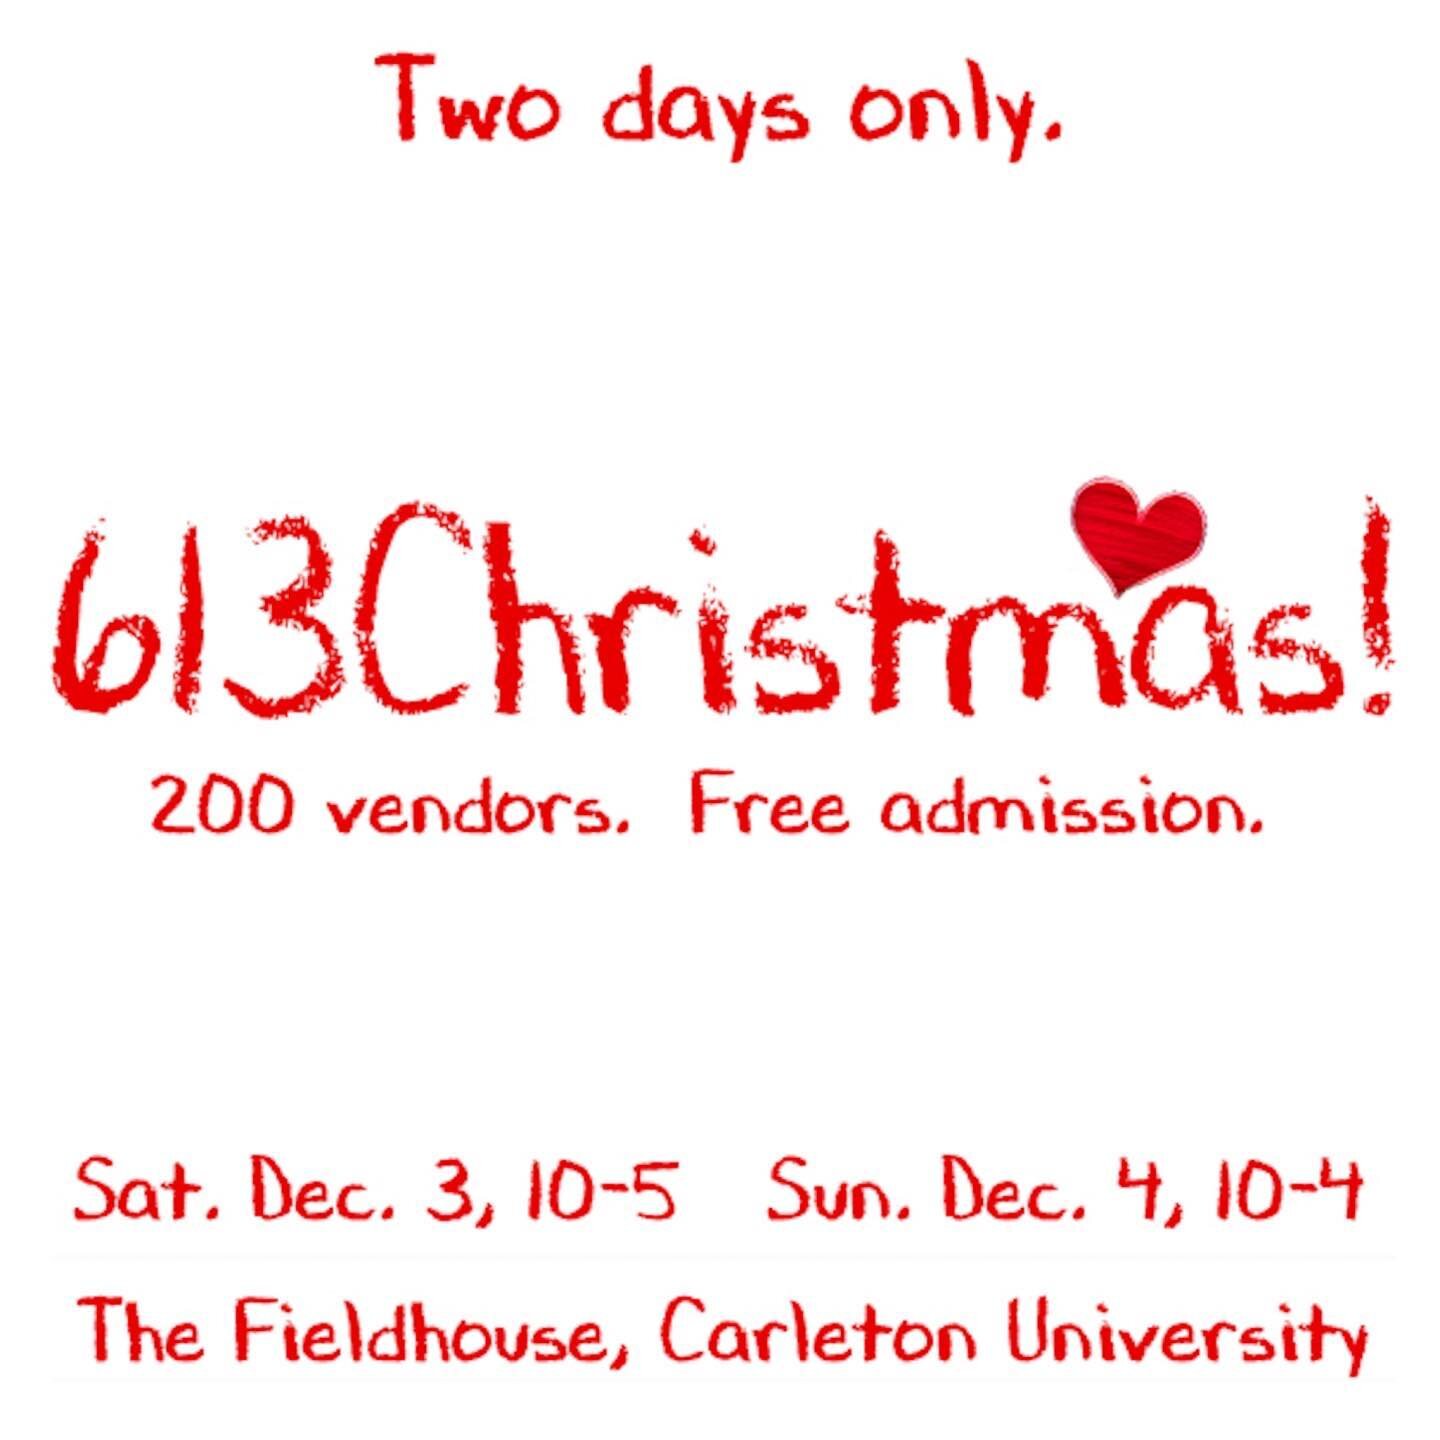 Will be there this weekend. Selling not only my photography but also my collages. Drop by. #613flea